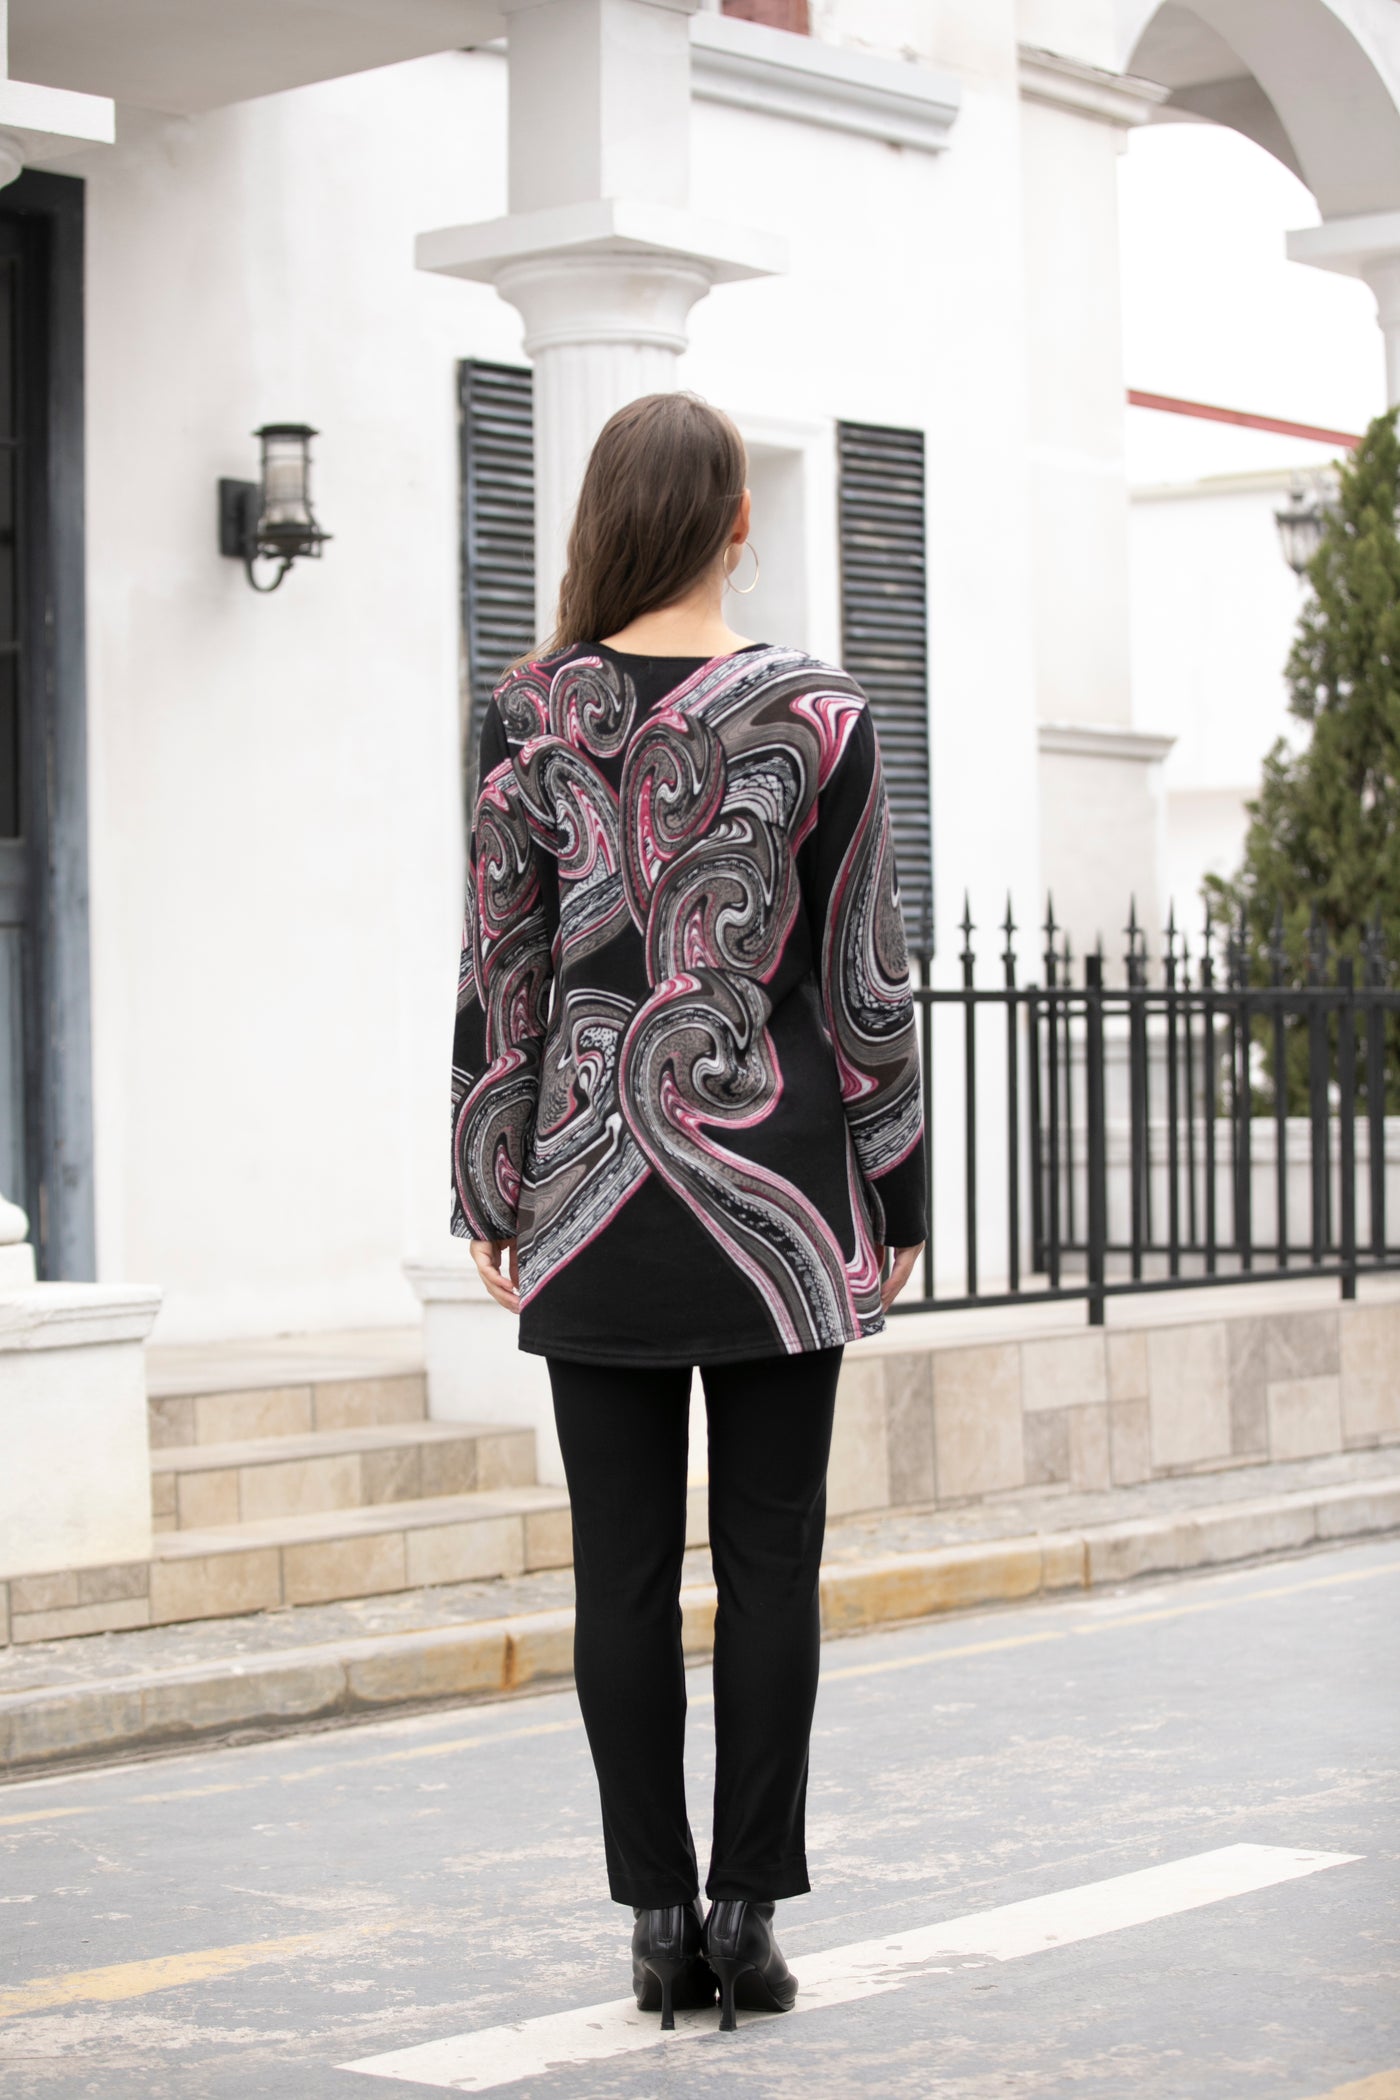 Carla's Printed Top with Pocket